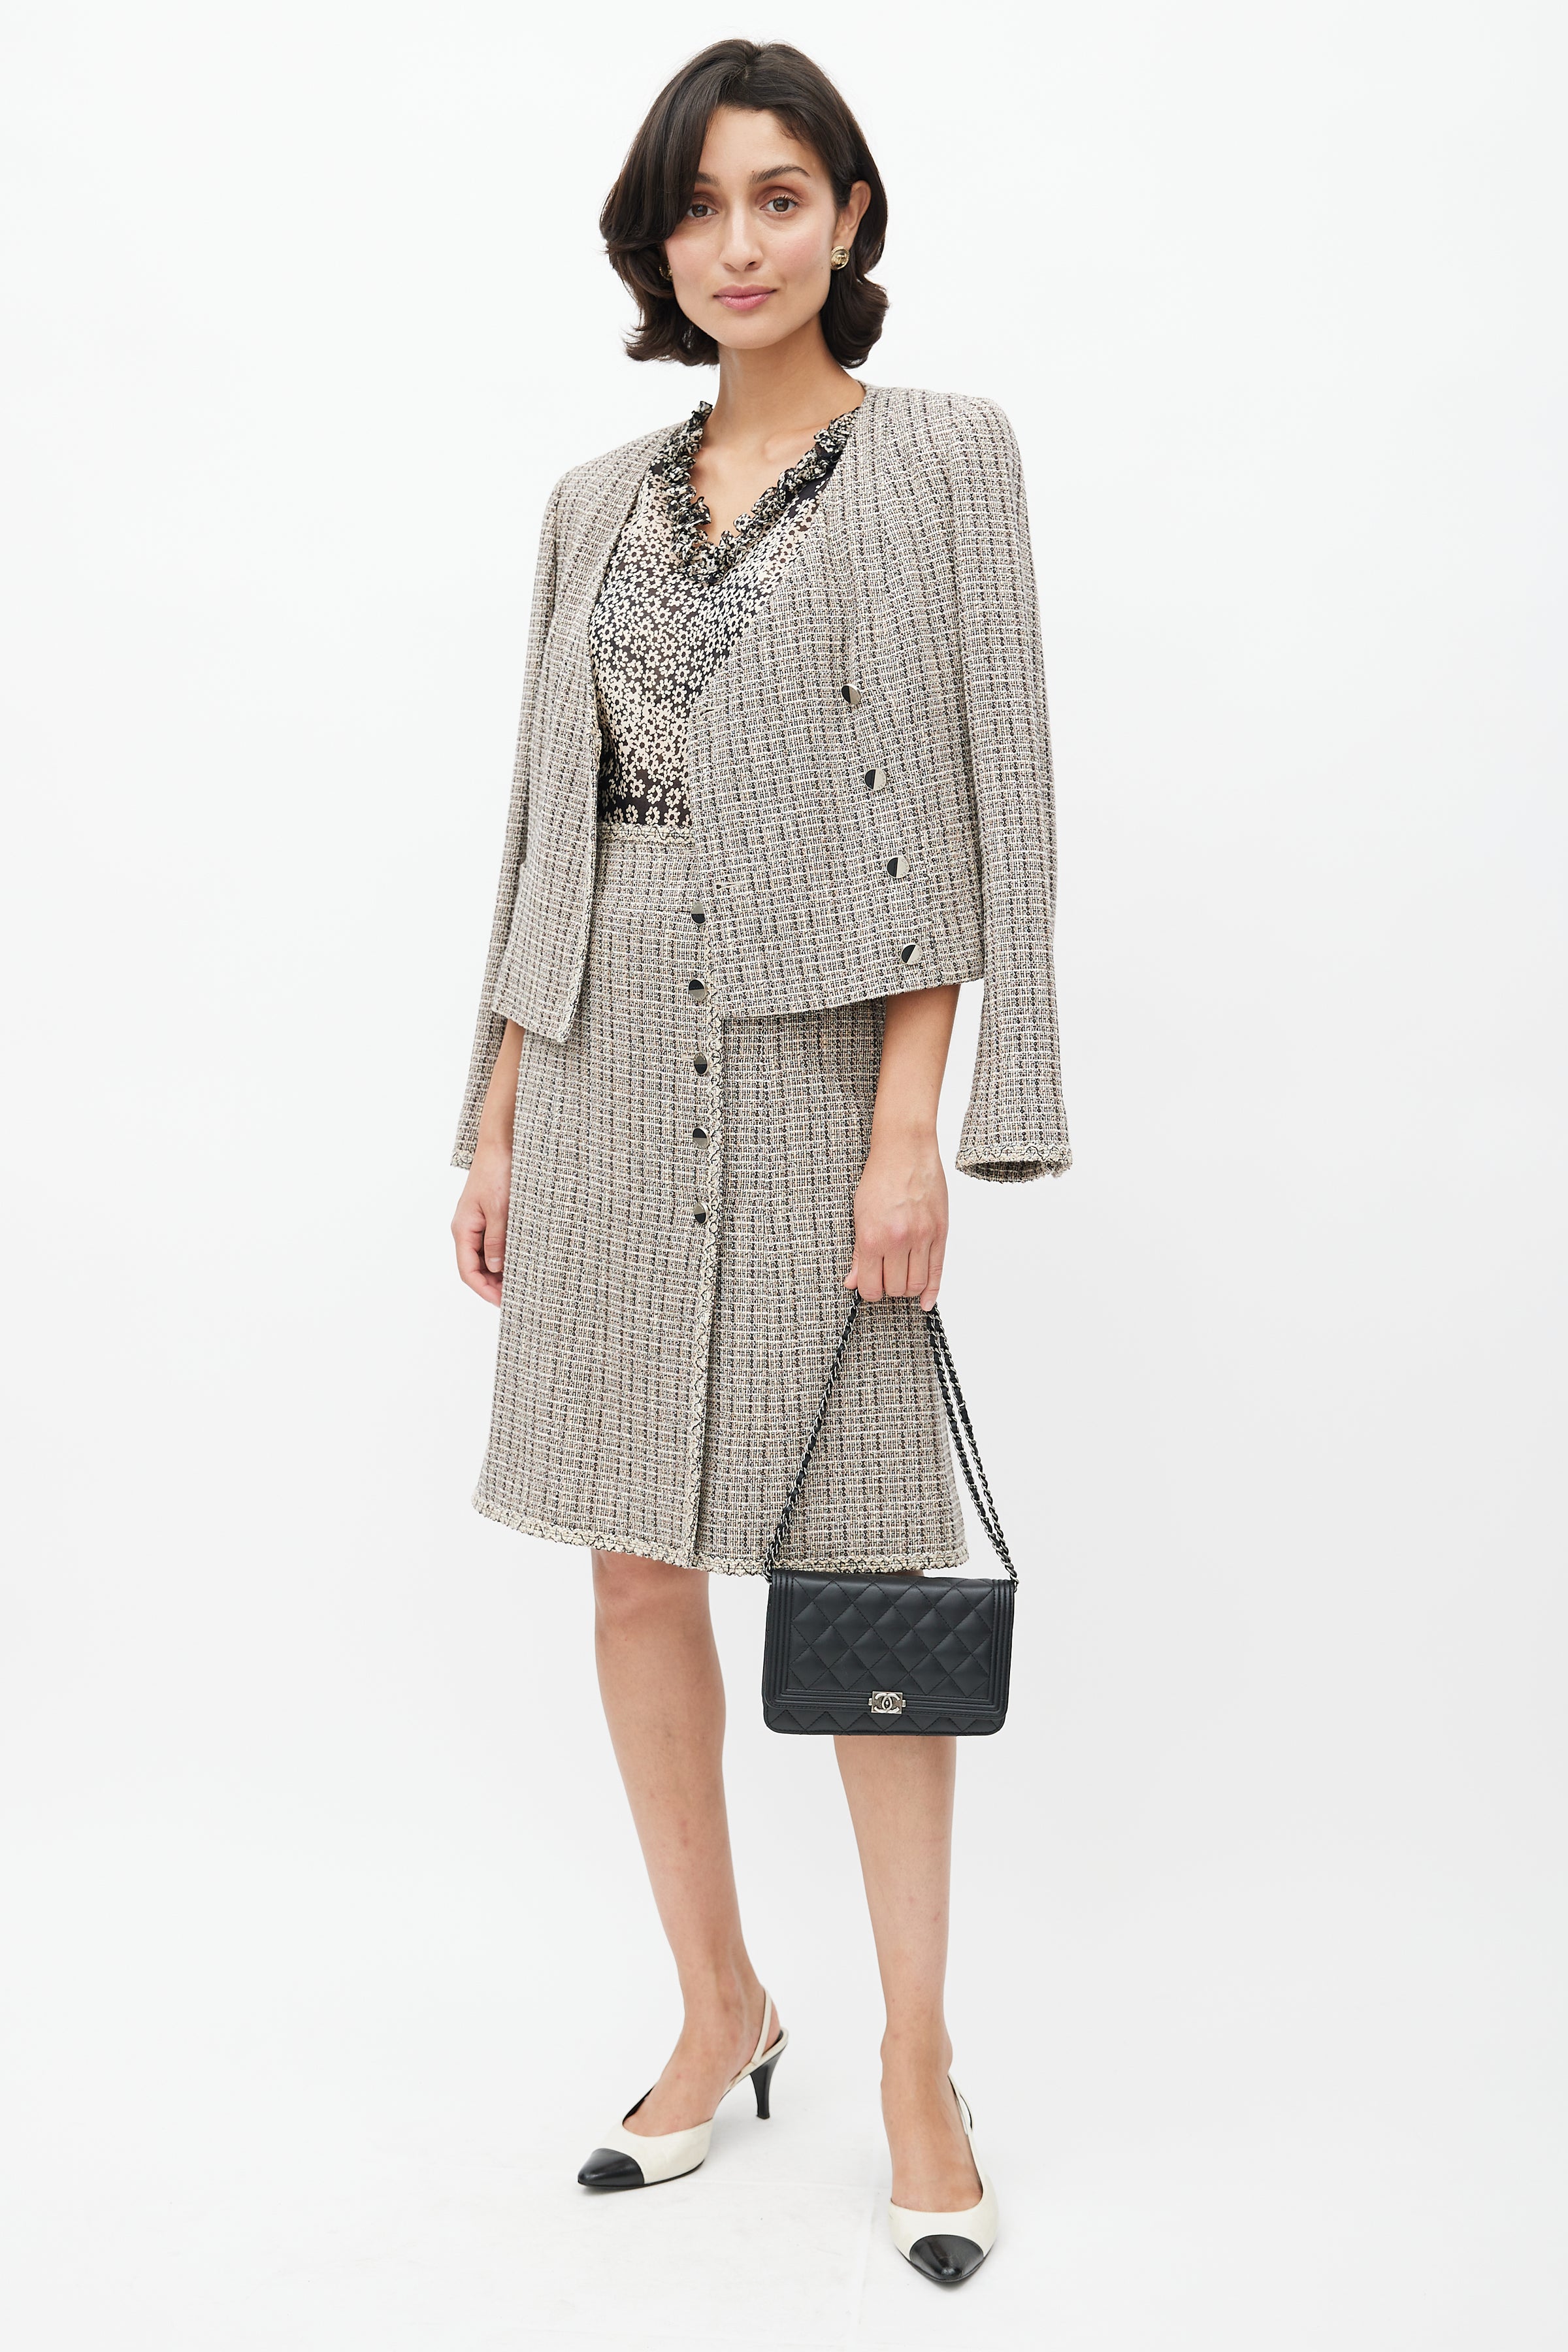 Chanel // Spring 2003 Black & Cream Tweed Skirt Suit – VSP Consignment